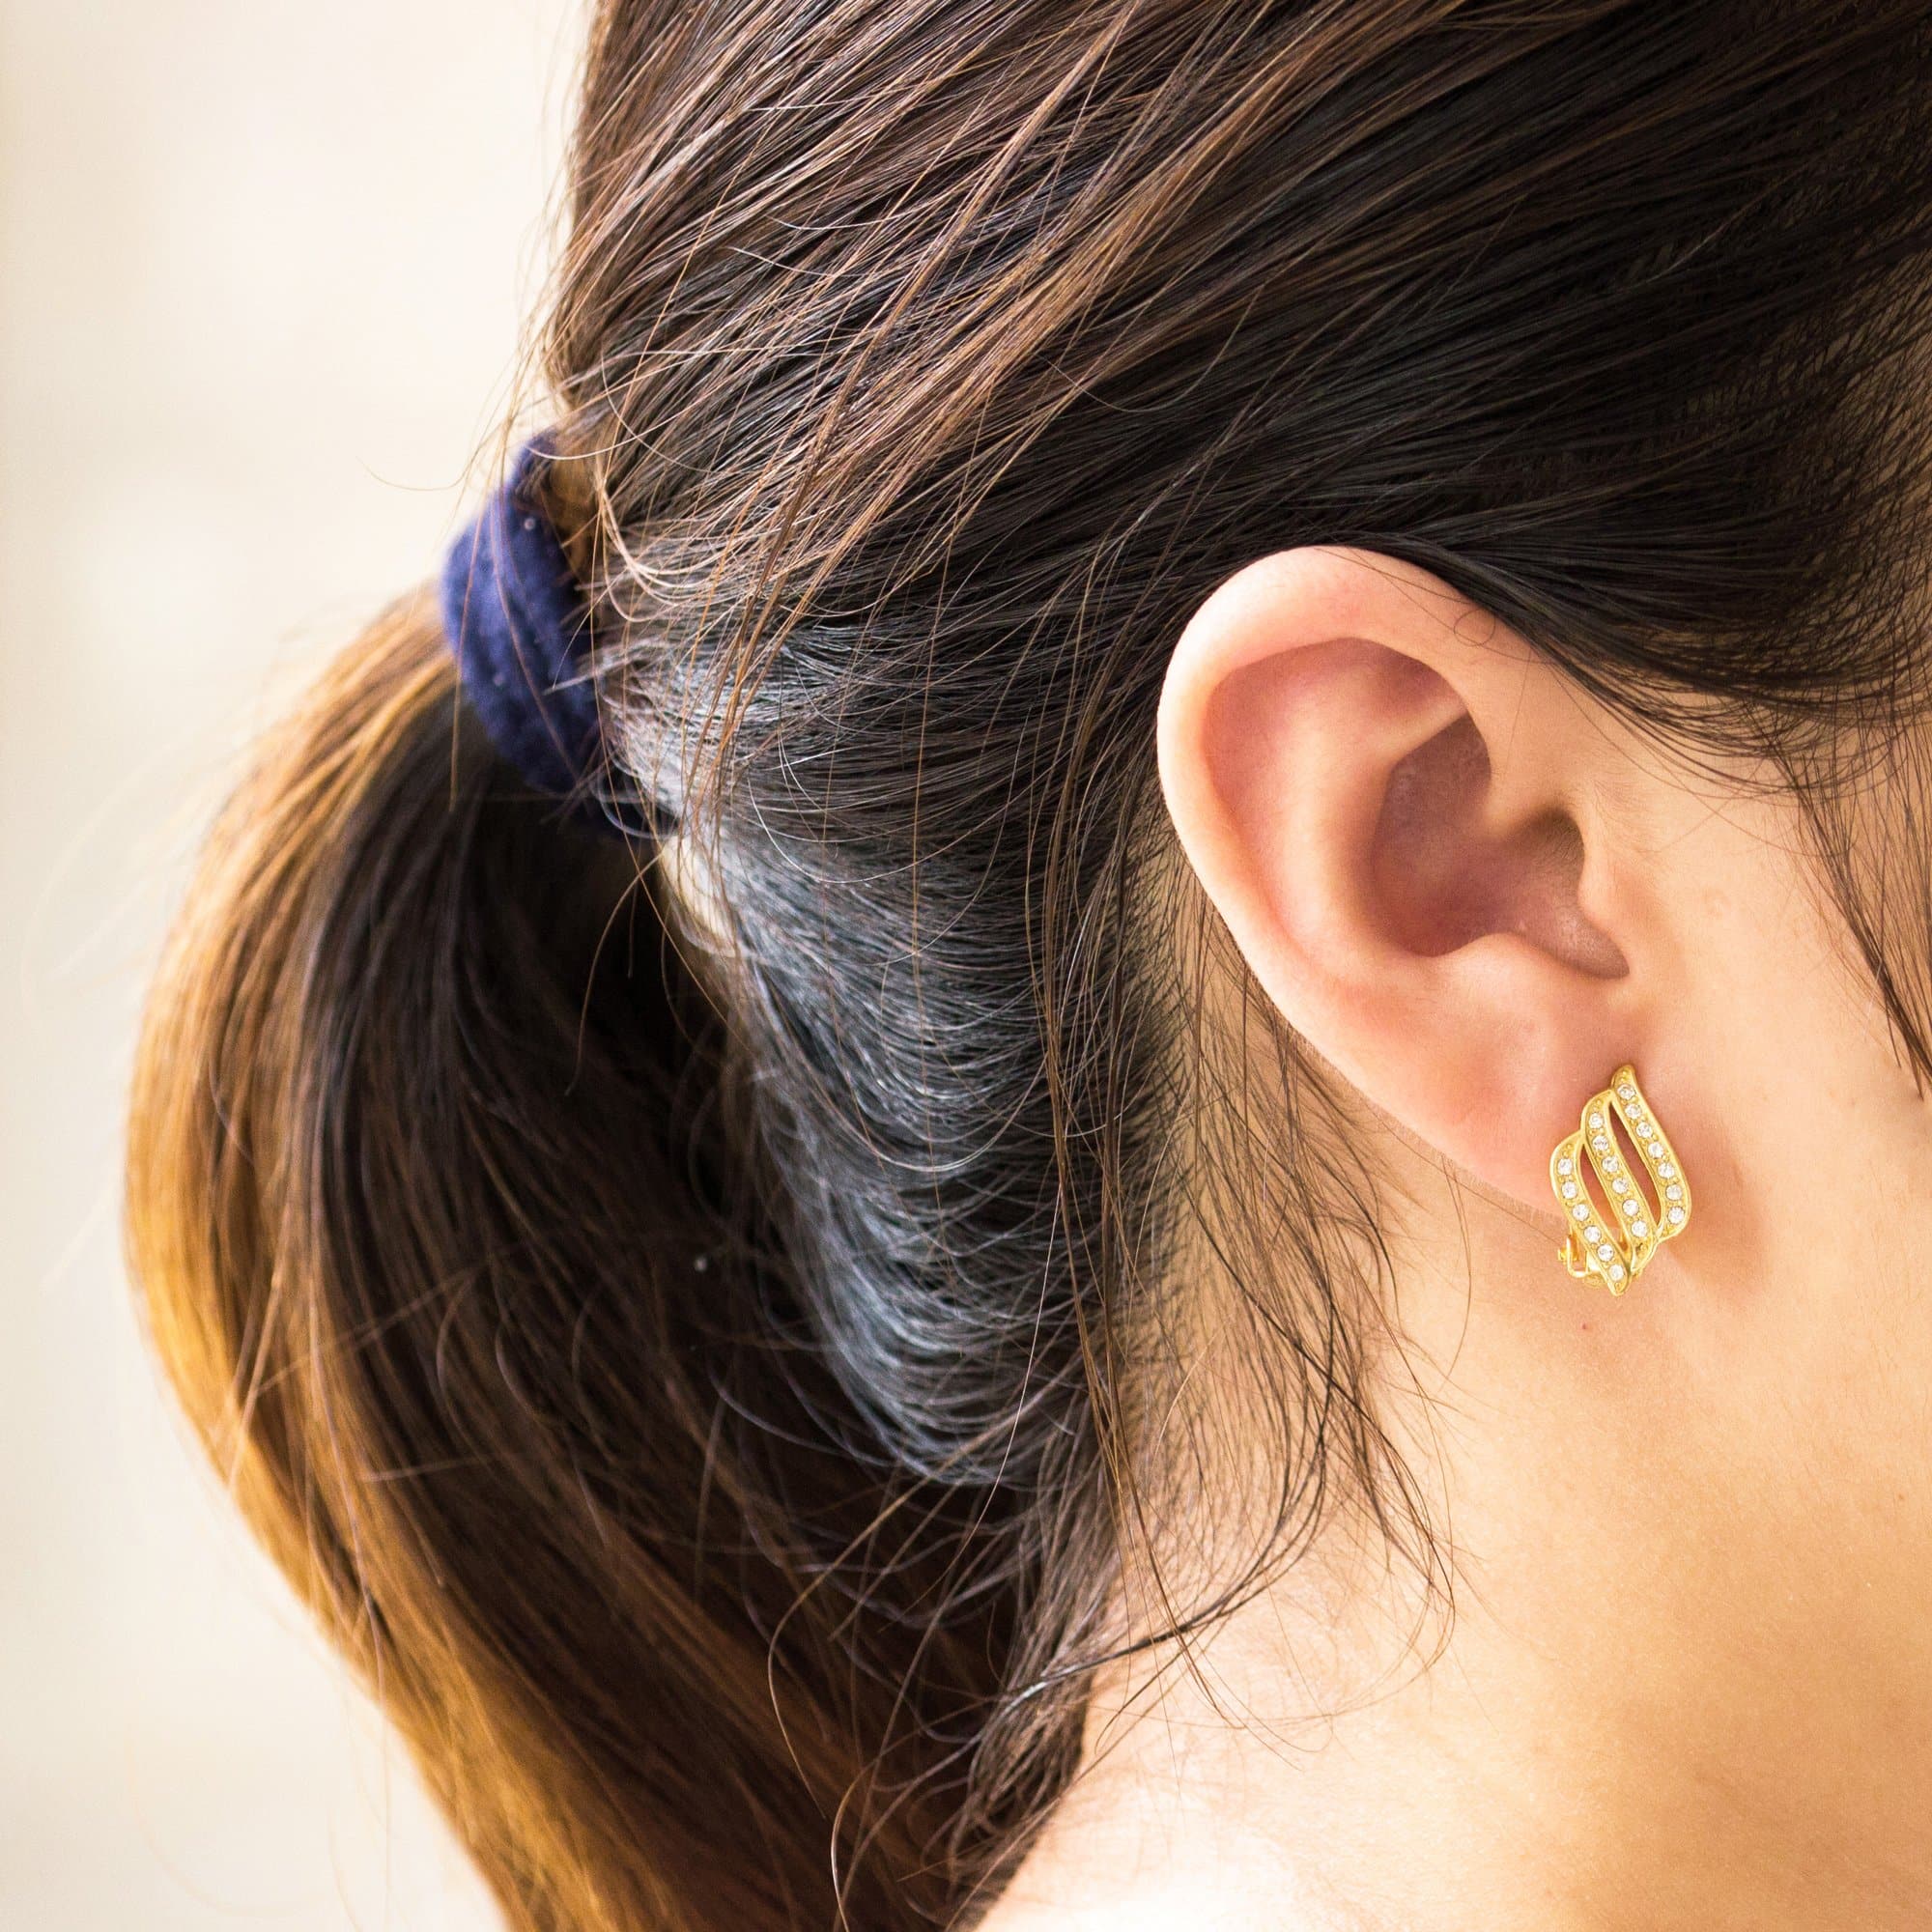 Gold Plated Triple Row Clip On Earrings Created with Zircondia® Crystals